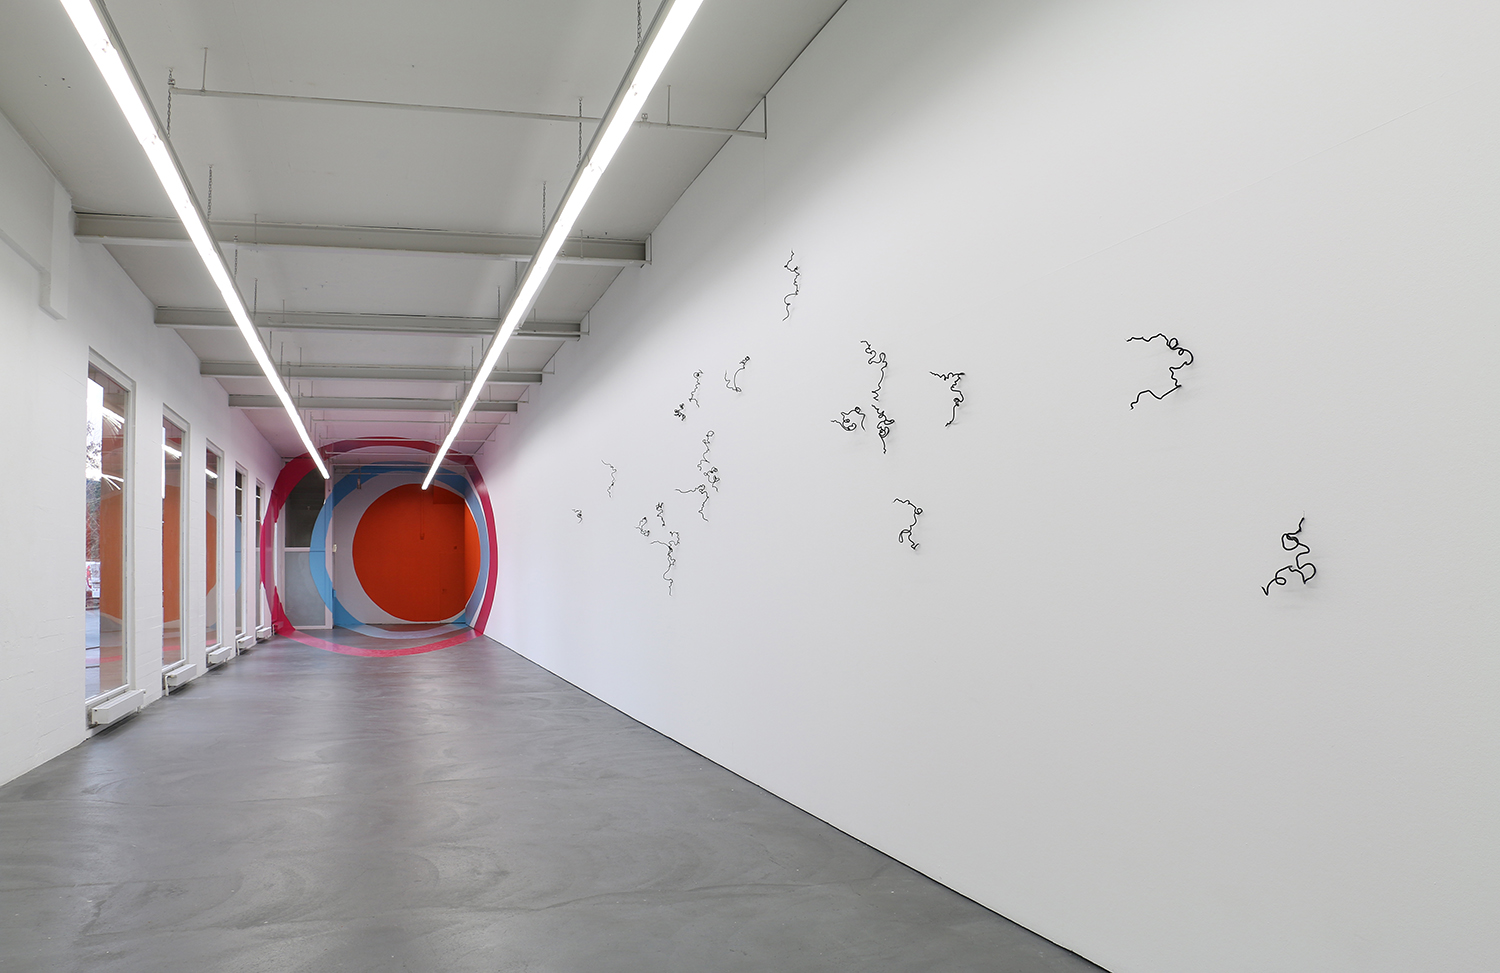   Scribble , 2015, glass, dimensions variable   Regionale 16  at Kunsthaus Baselland, Muttenz 